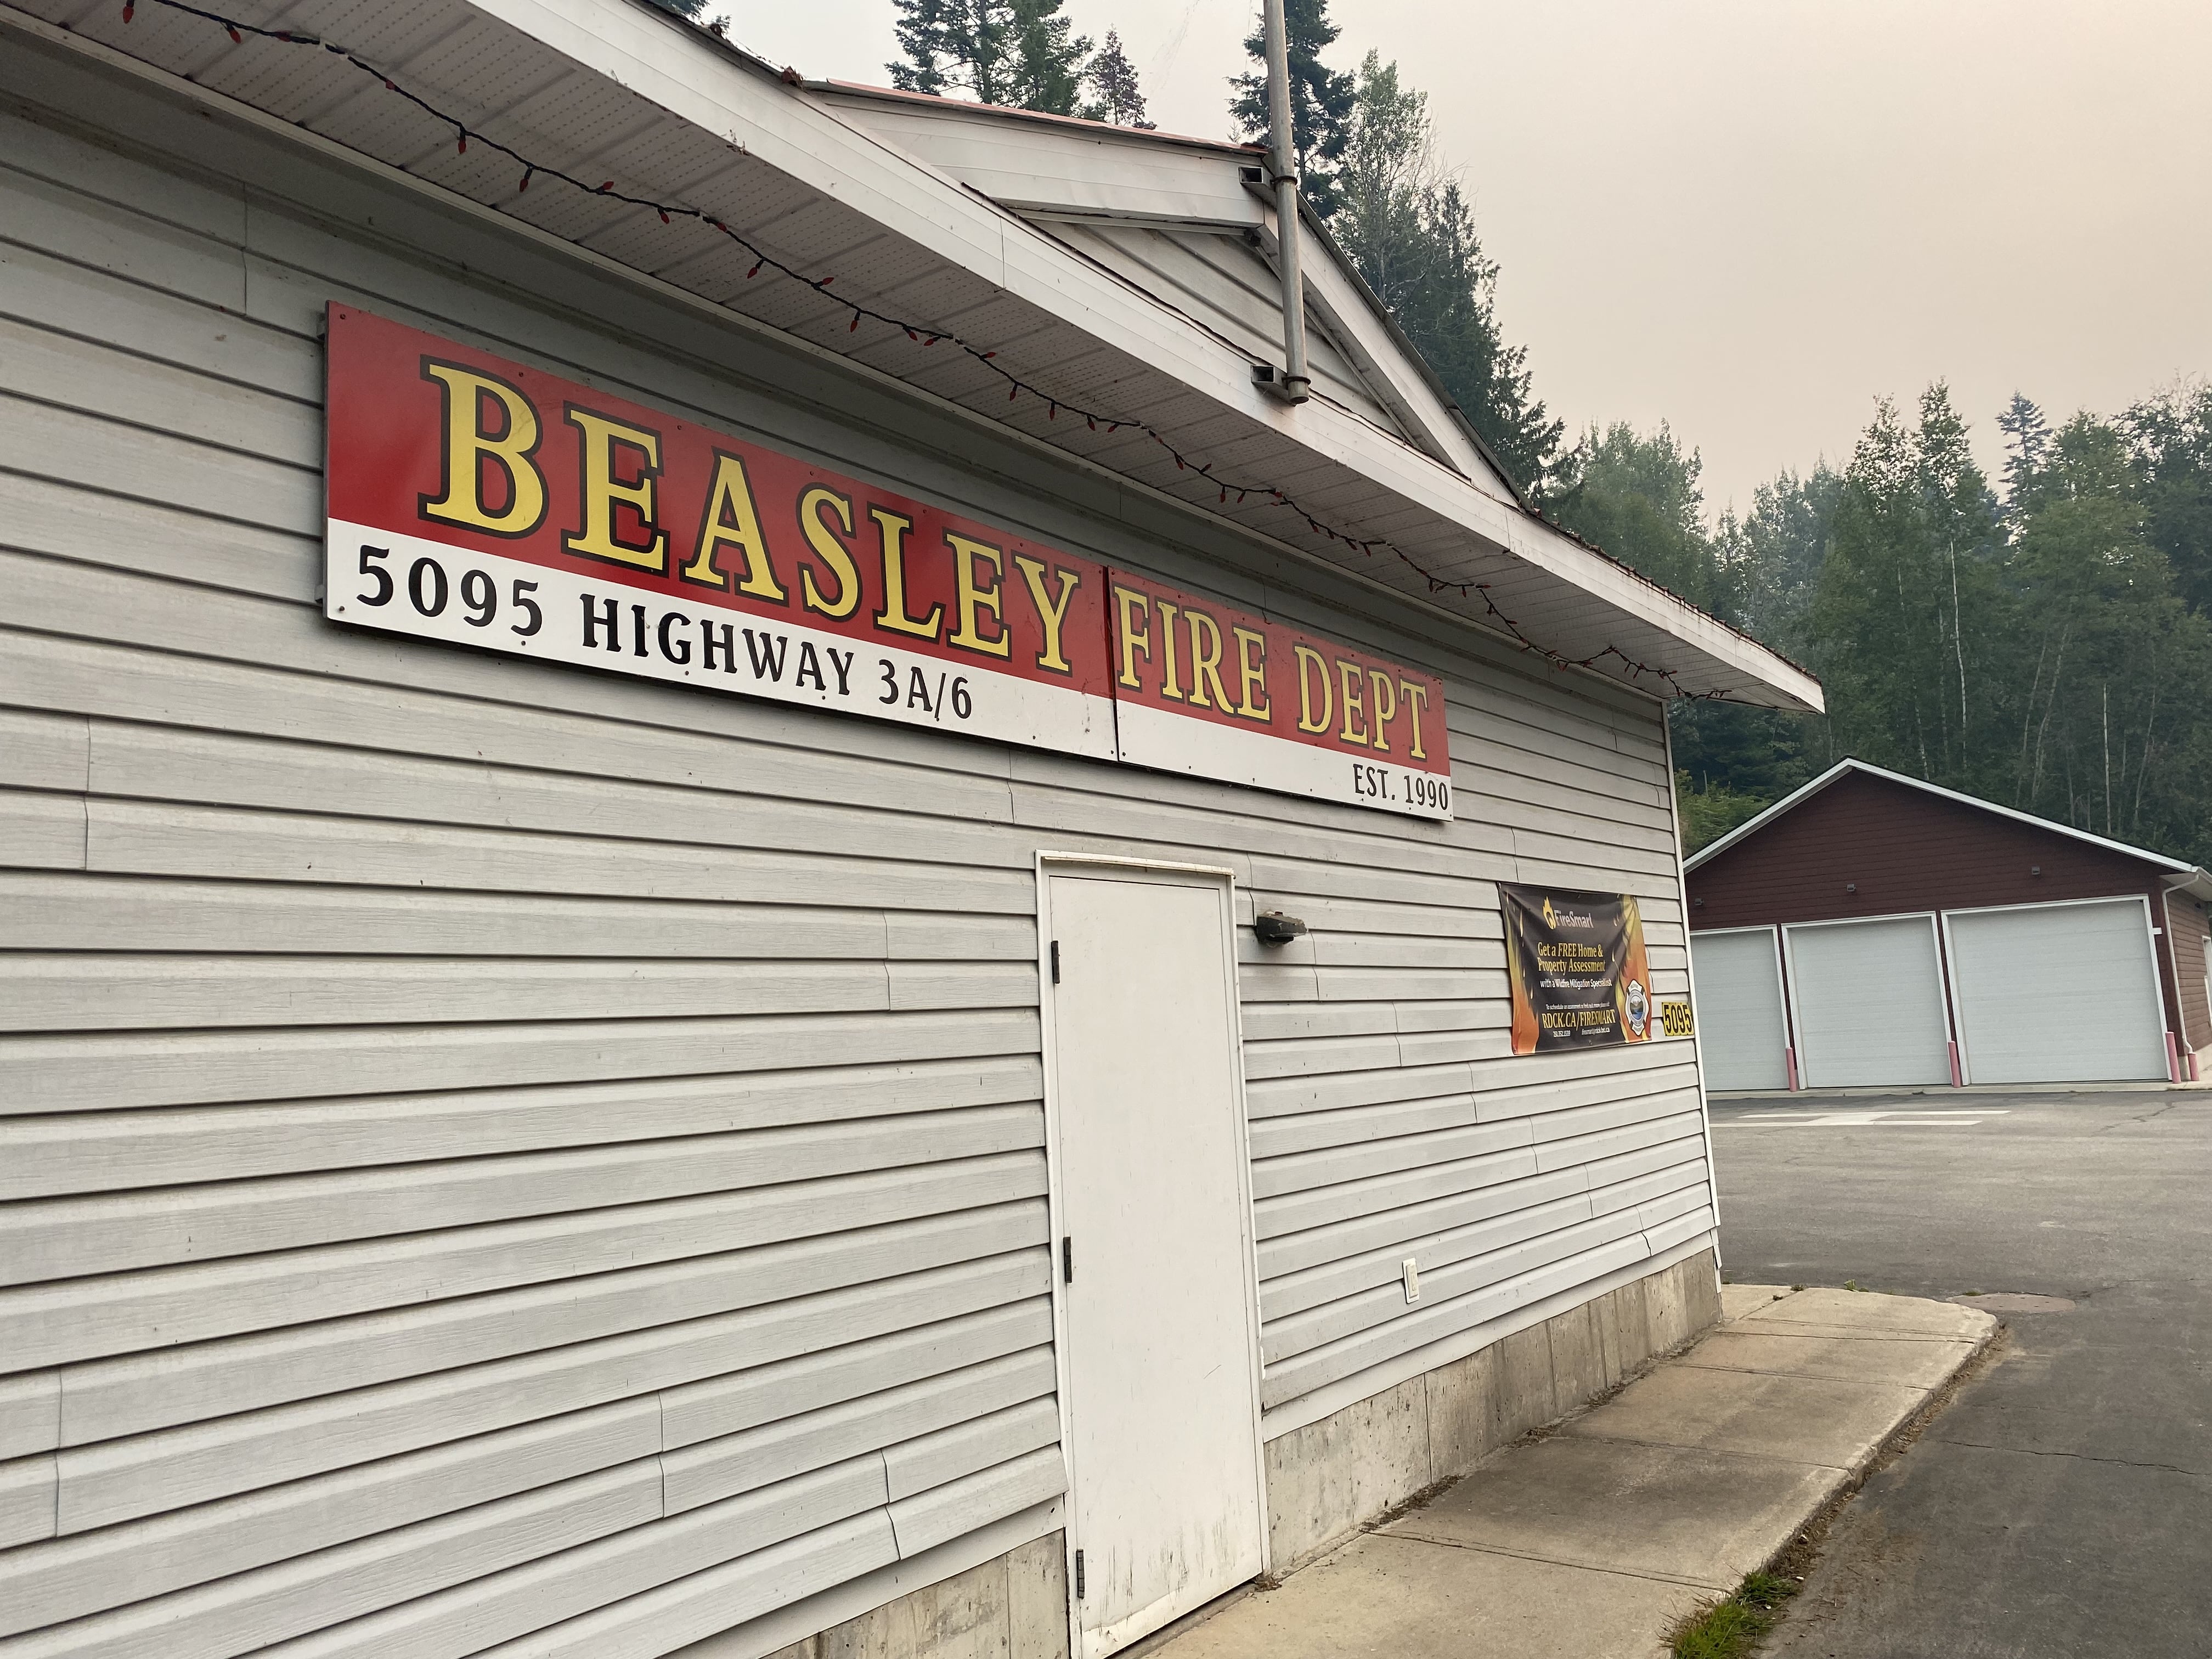 Thieves steal more fire equipment, this time from Beasley Fire Hall